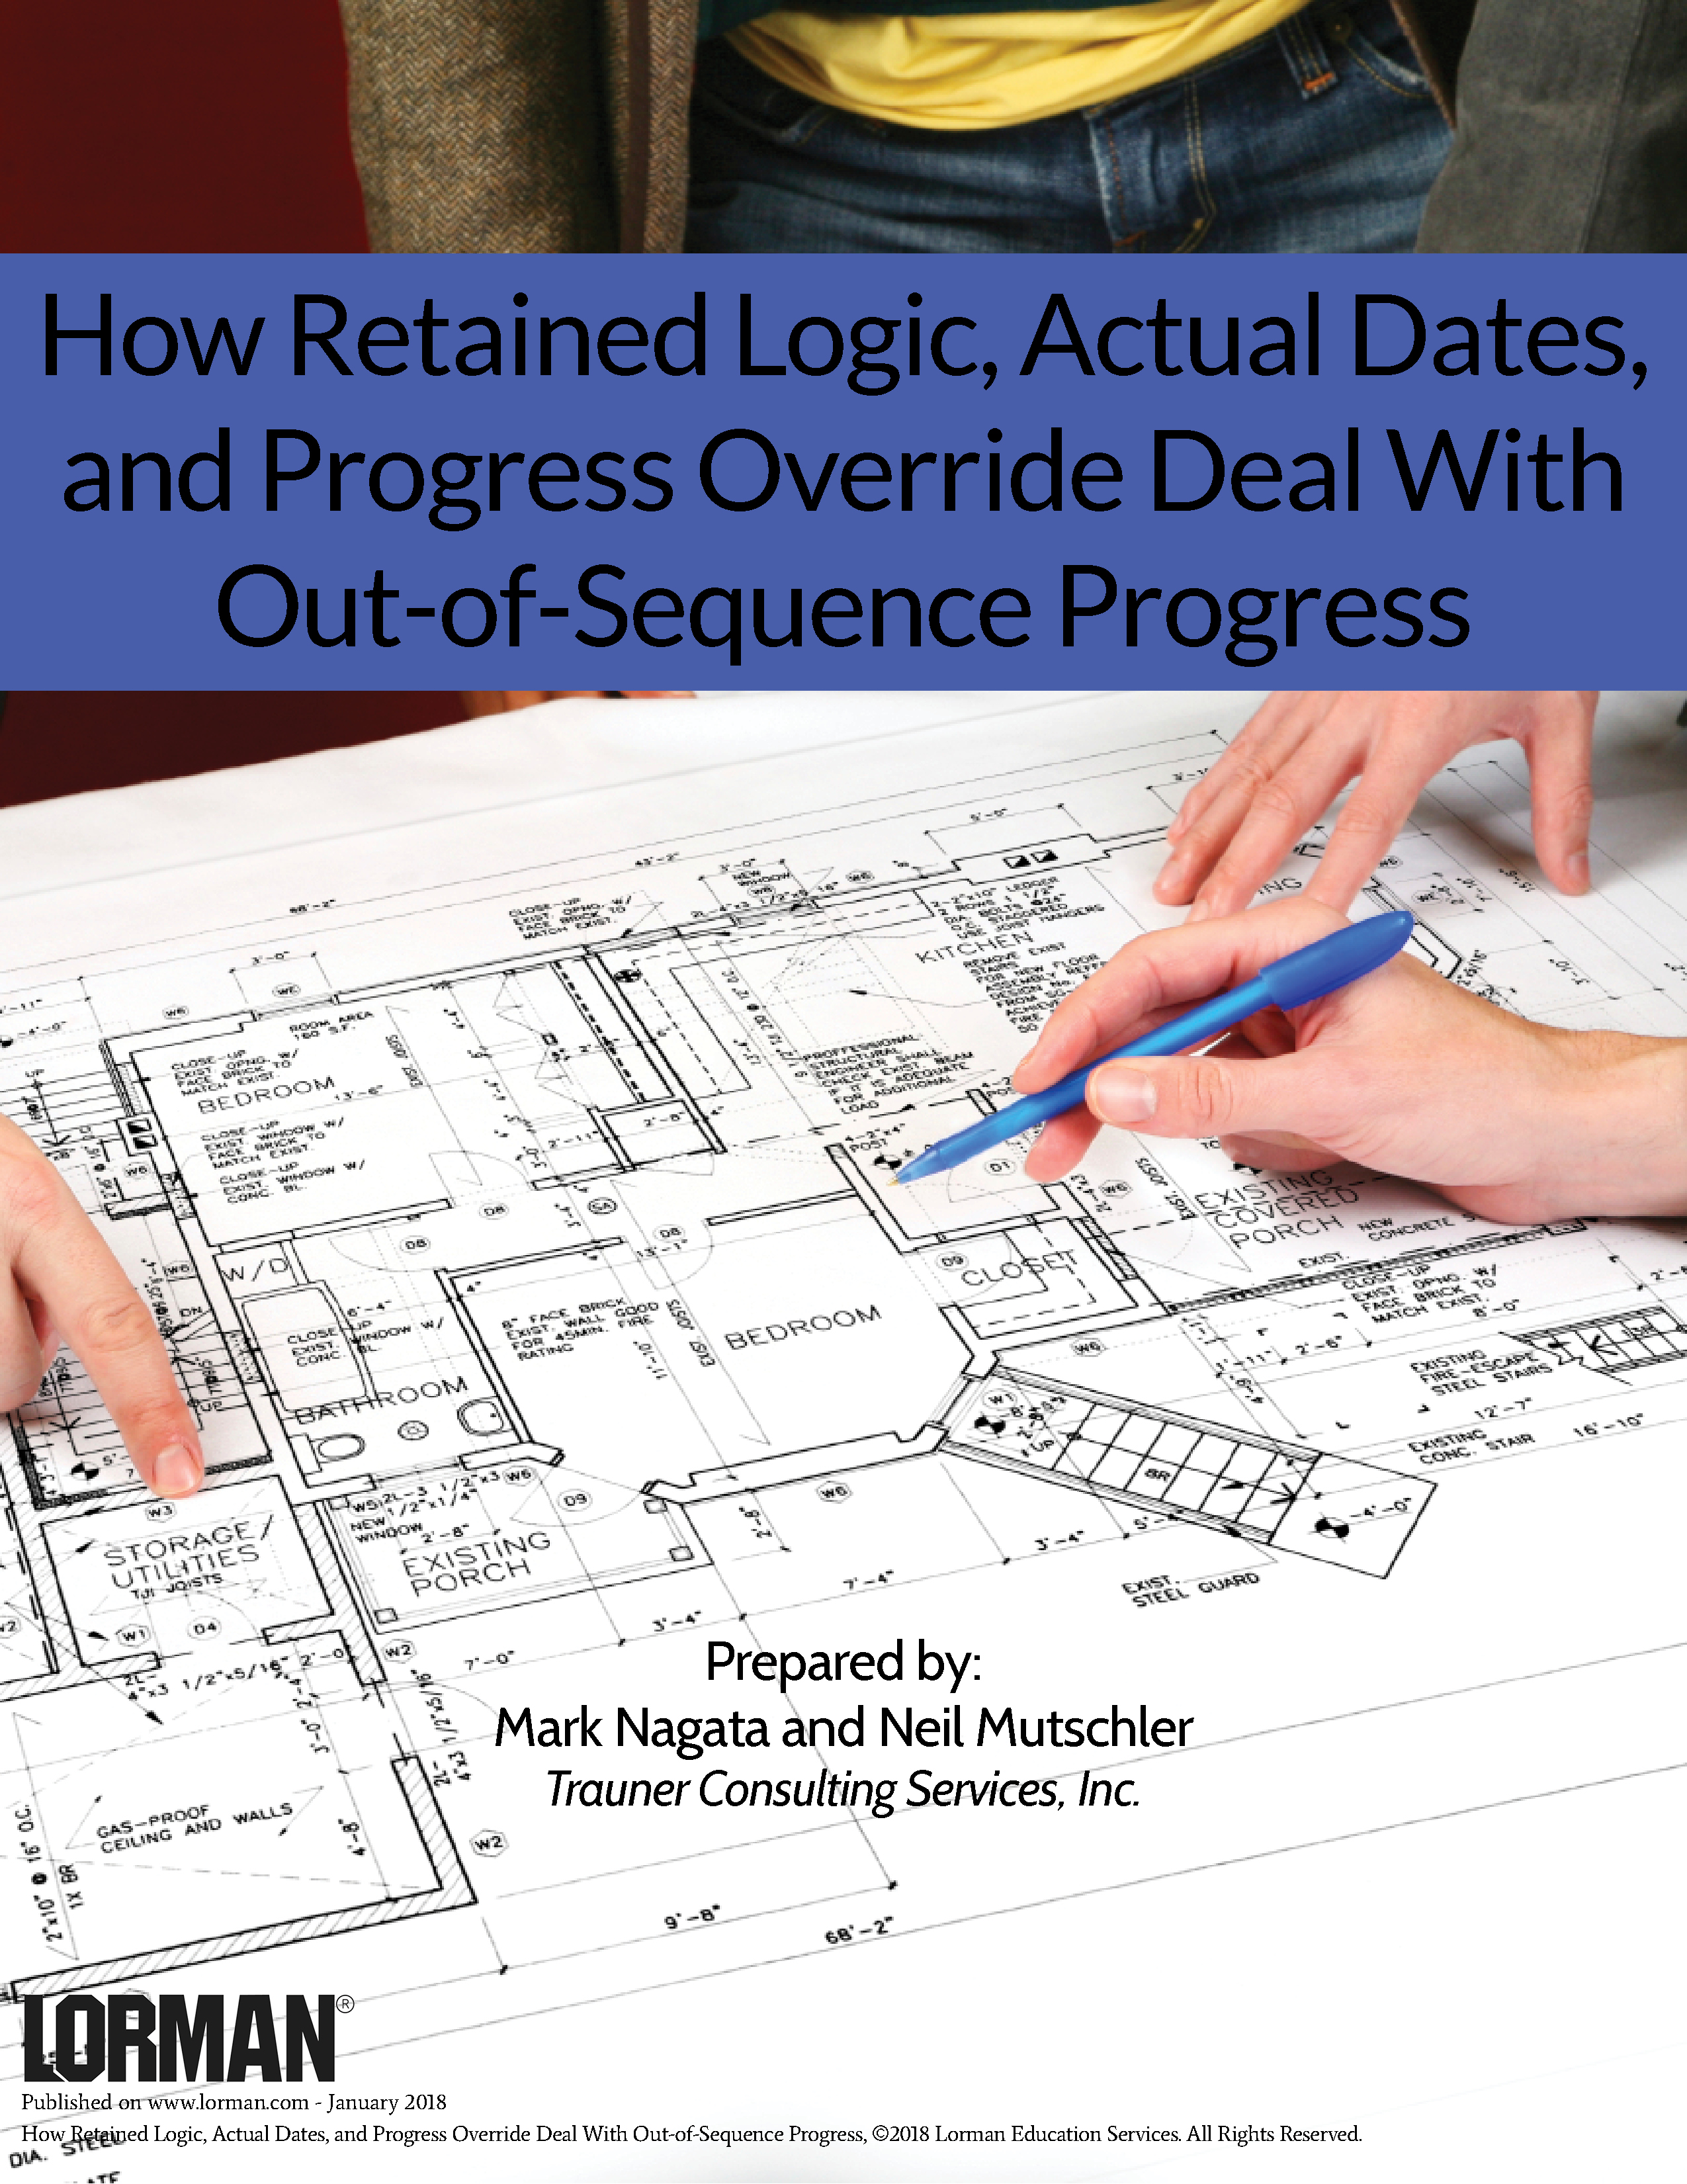 How Retained Logic, Actual Dates, and Progress Override Deal With Out-of-Sequence Progress